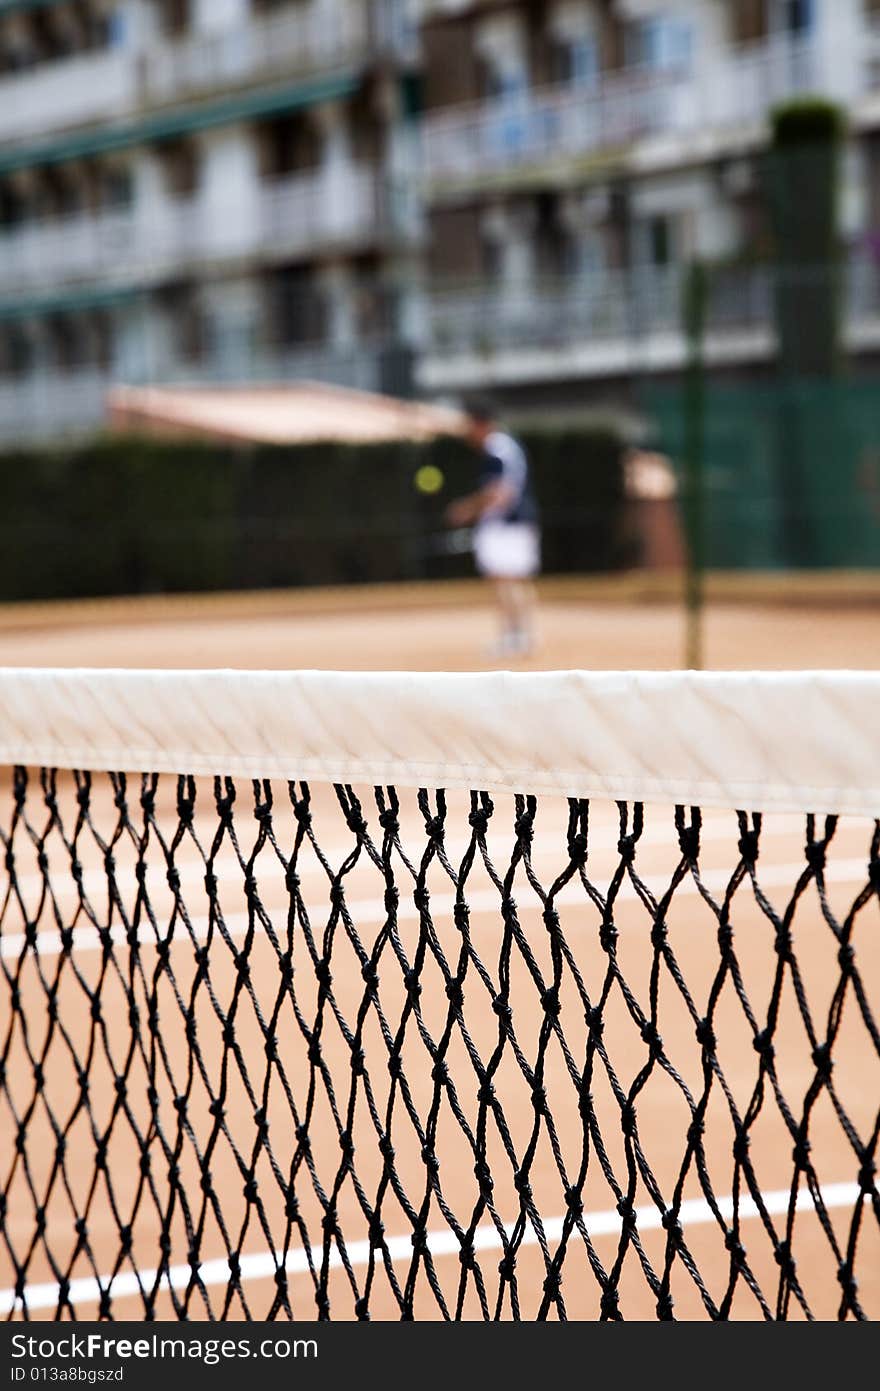 A net in the tennis court